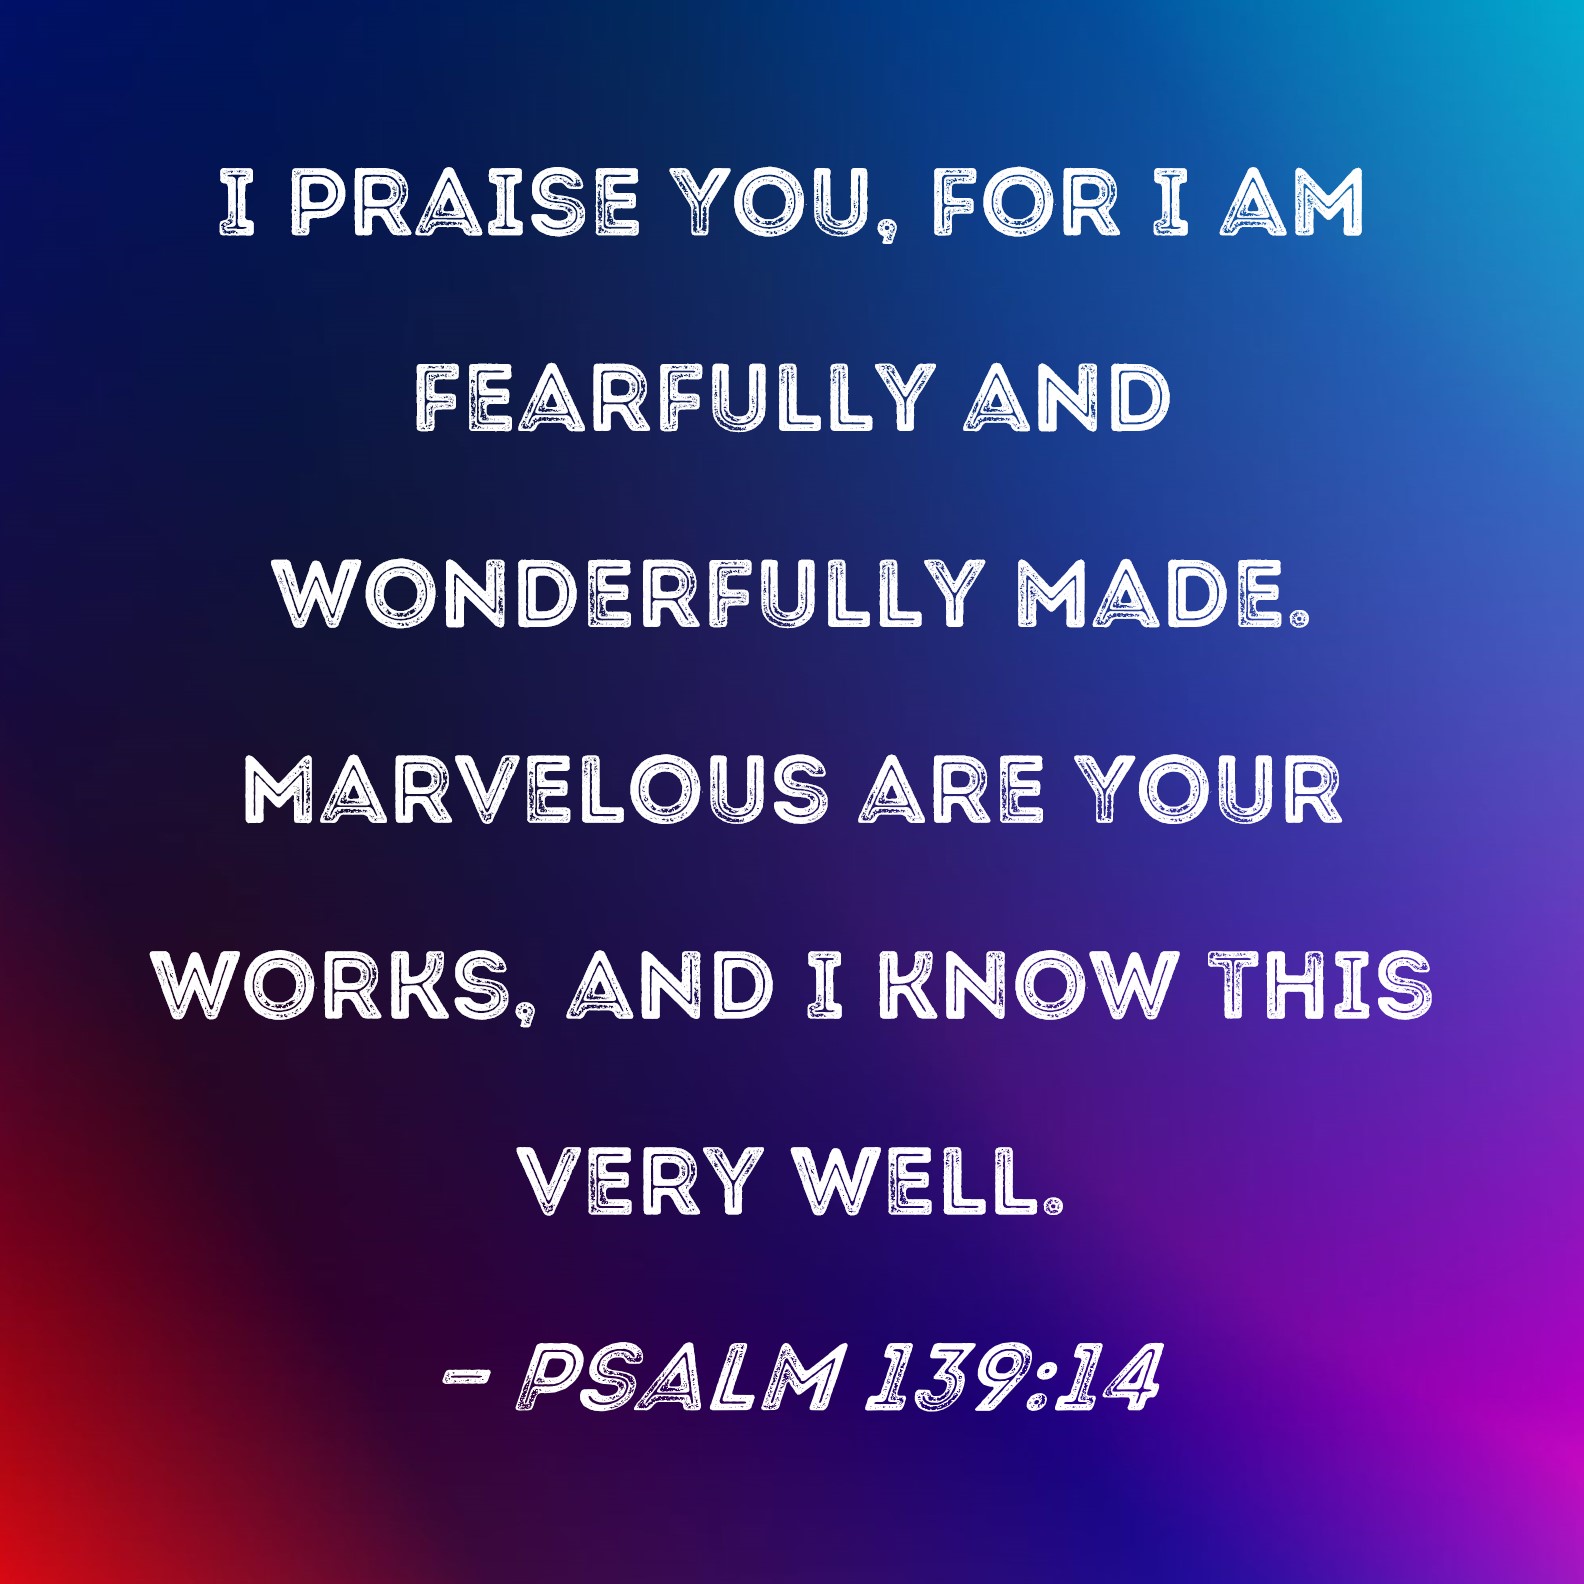 psalm-139-14-i-praise-you-for-i-am-fearfully-and-wonderfully-made